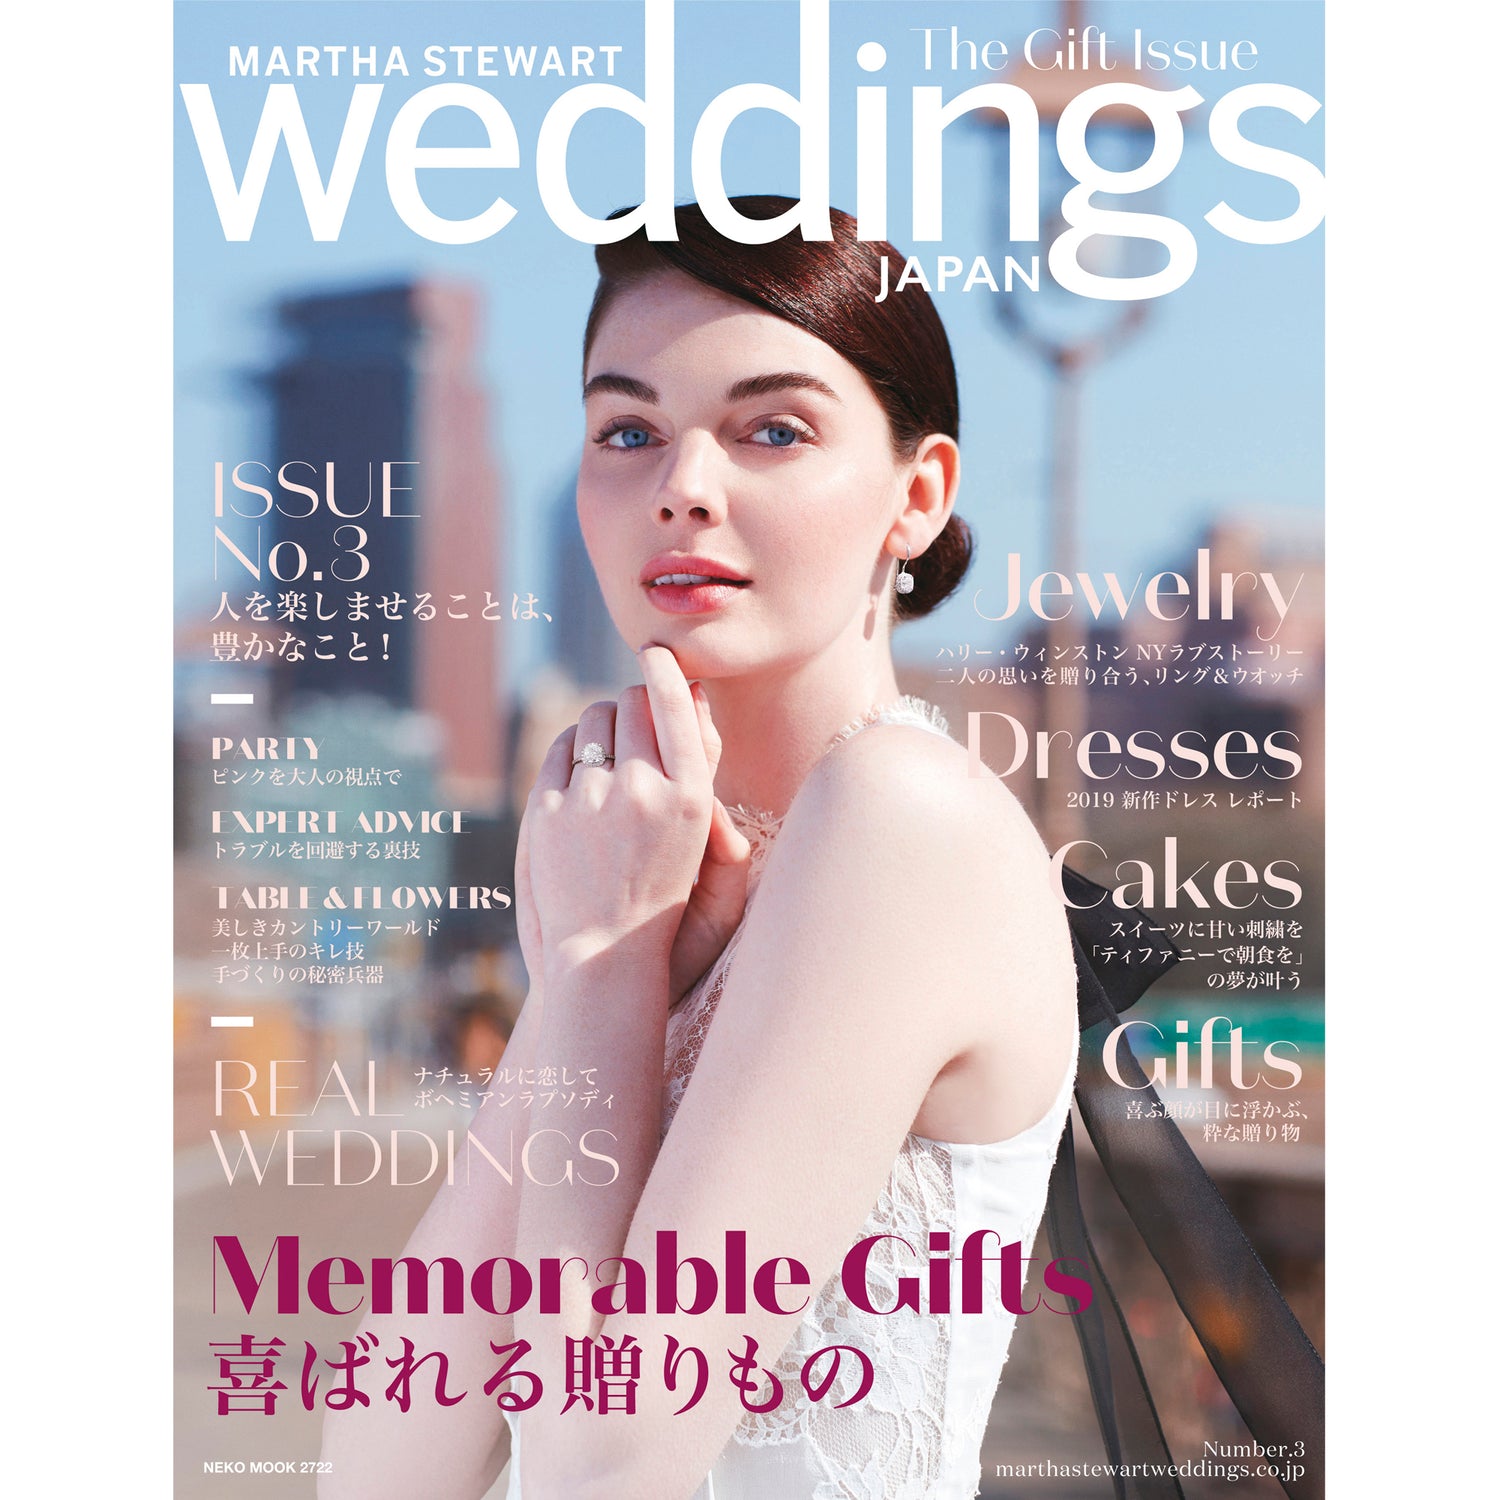 Martha Stewart Weddings feature our bridal collection